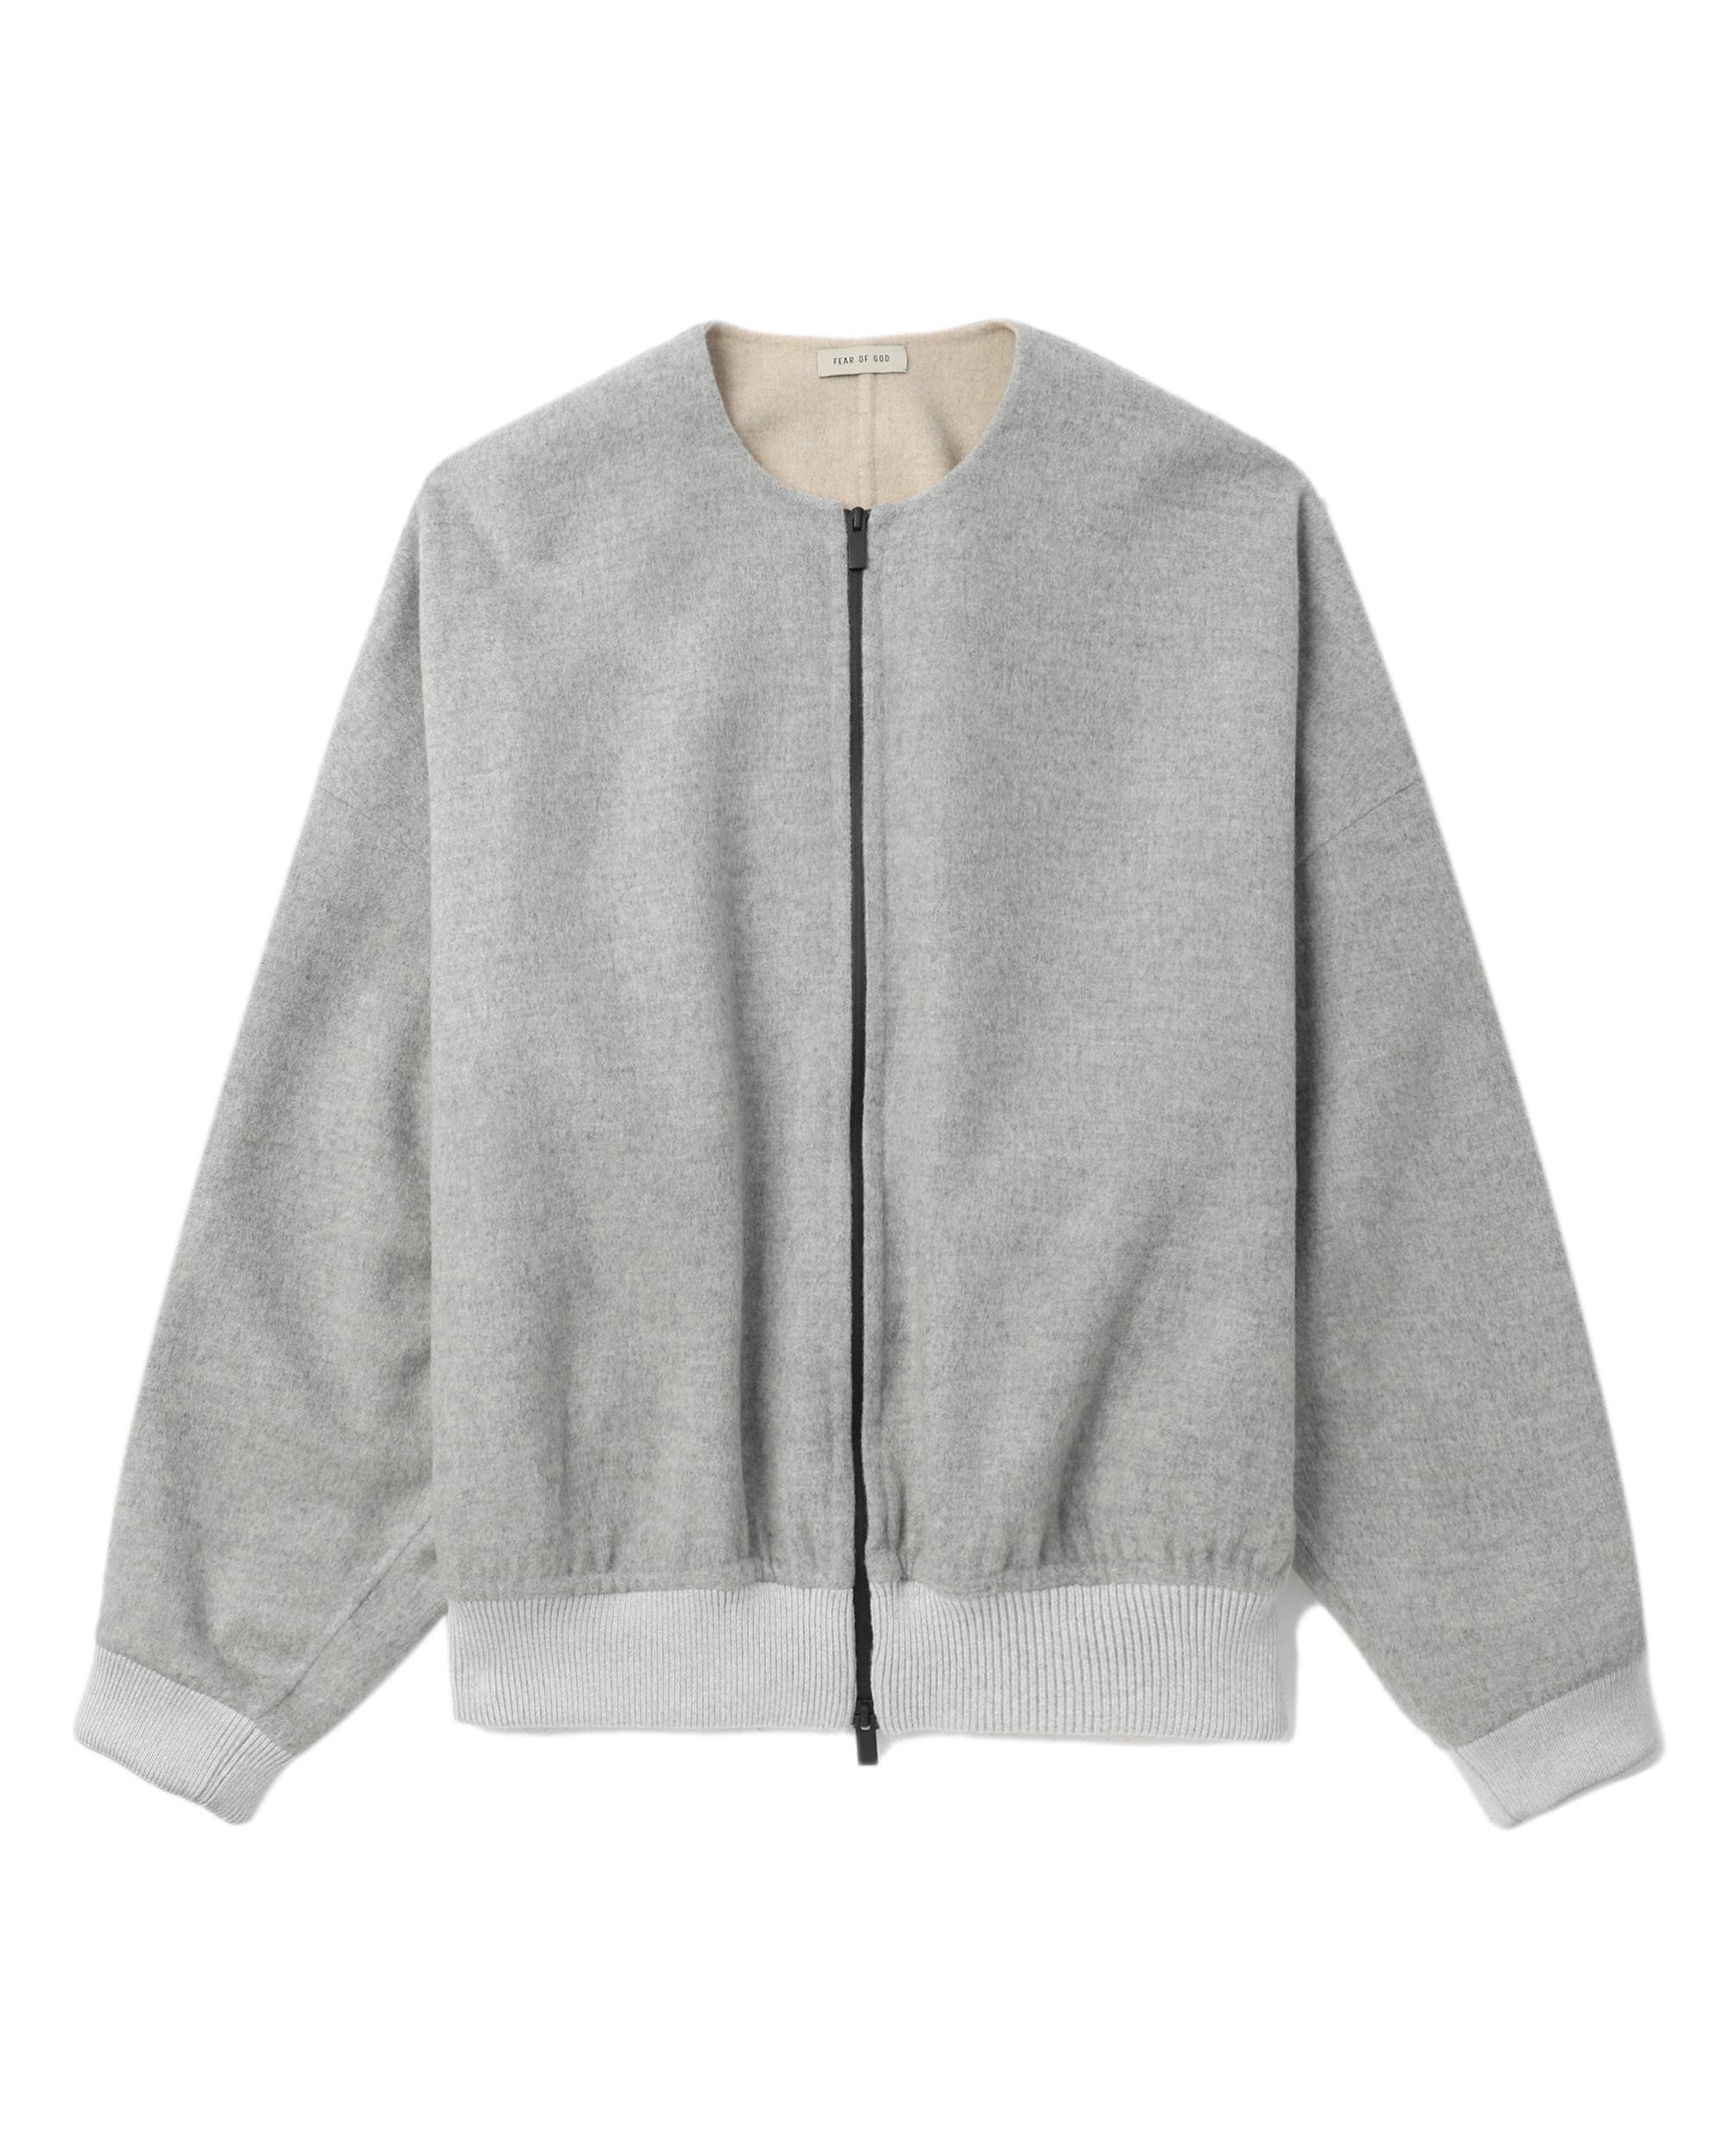 Collarless bomber by FEAR OF GOD